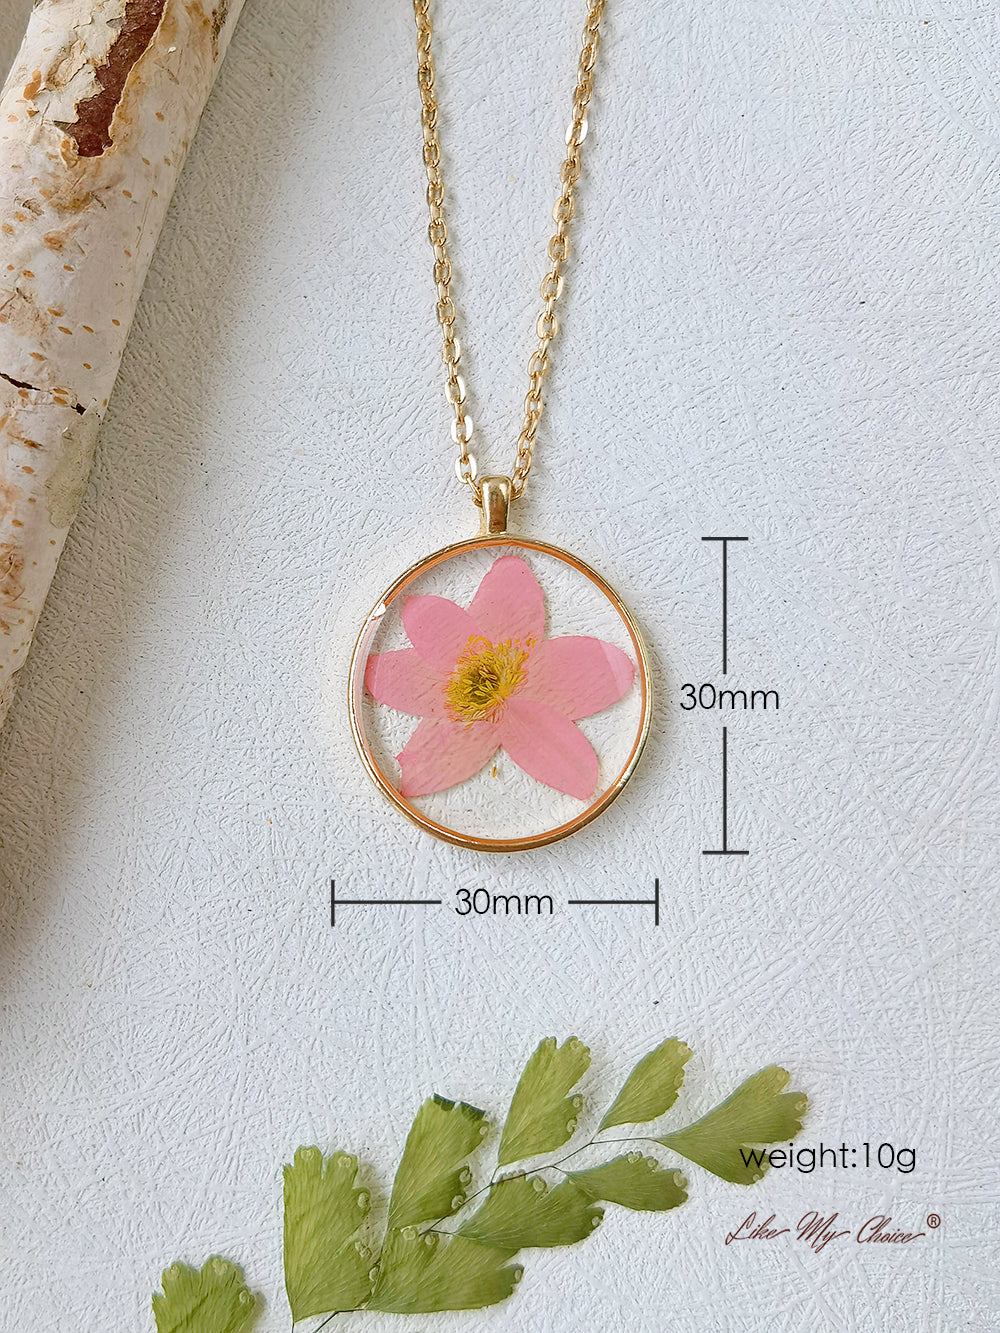 Forget-Me-Not Handmade Pressed Flower Necklace